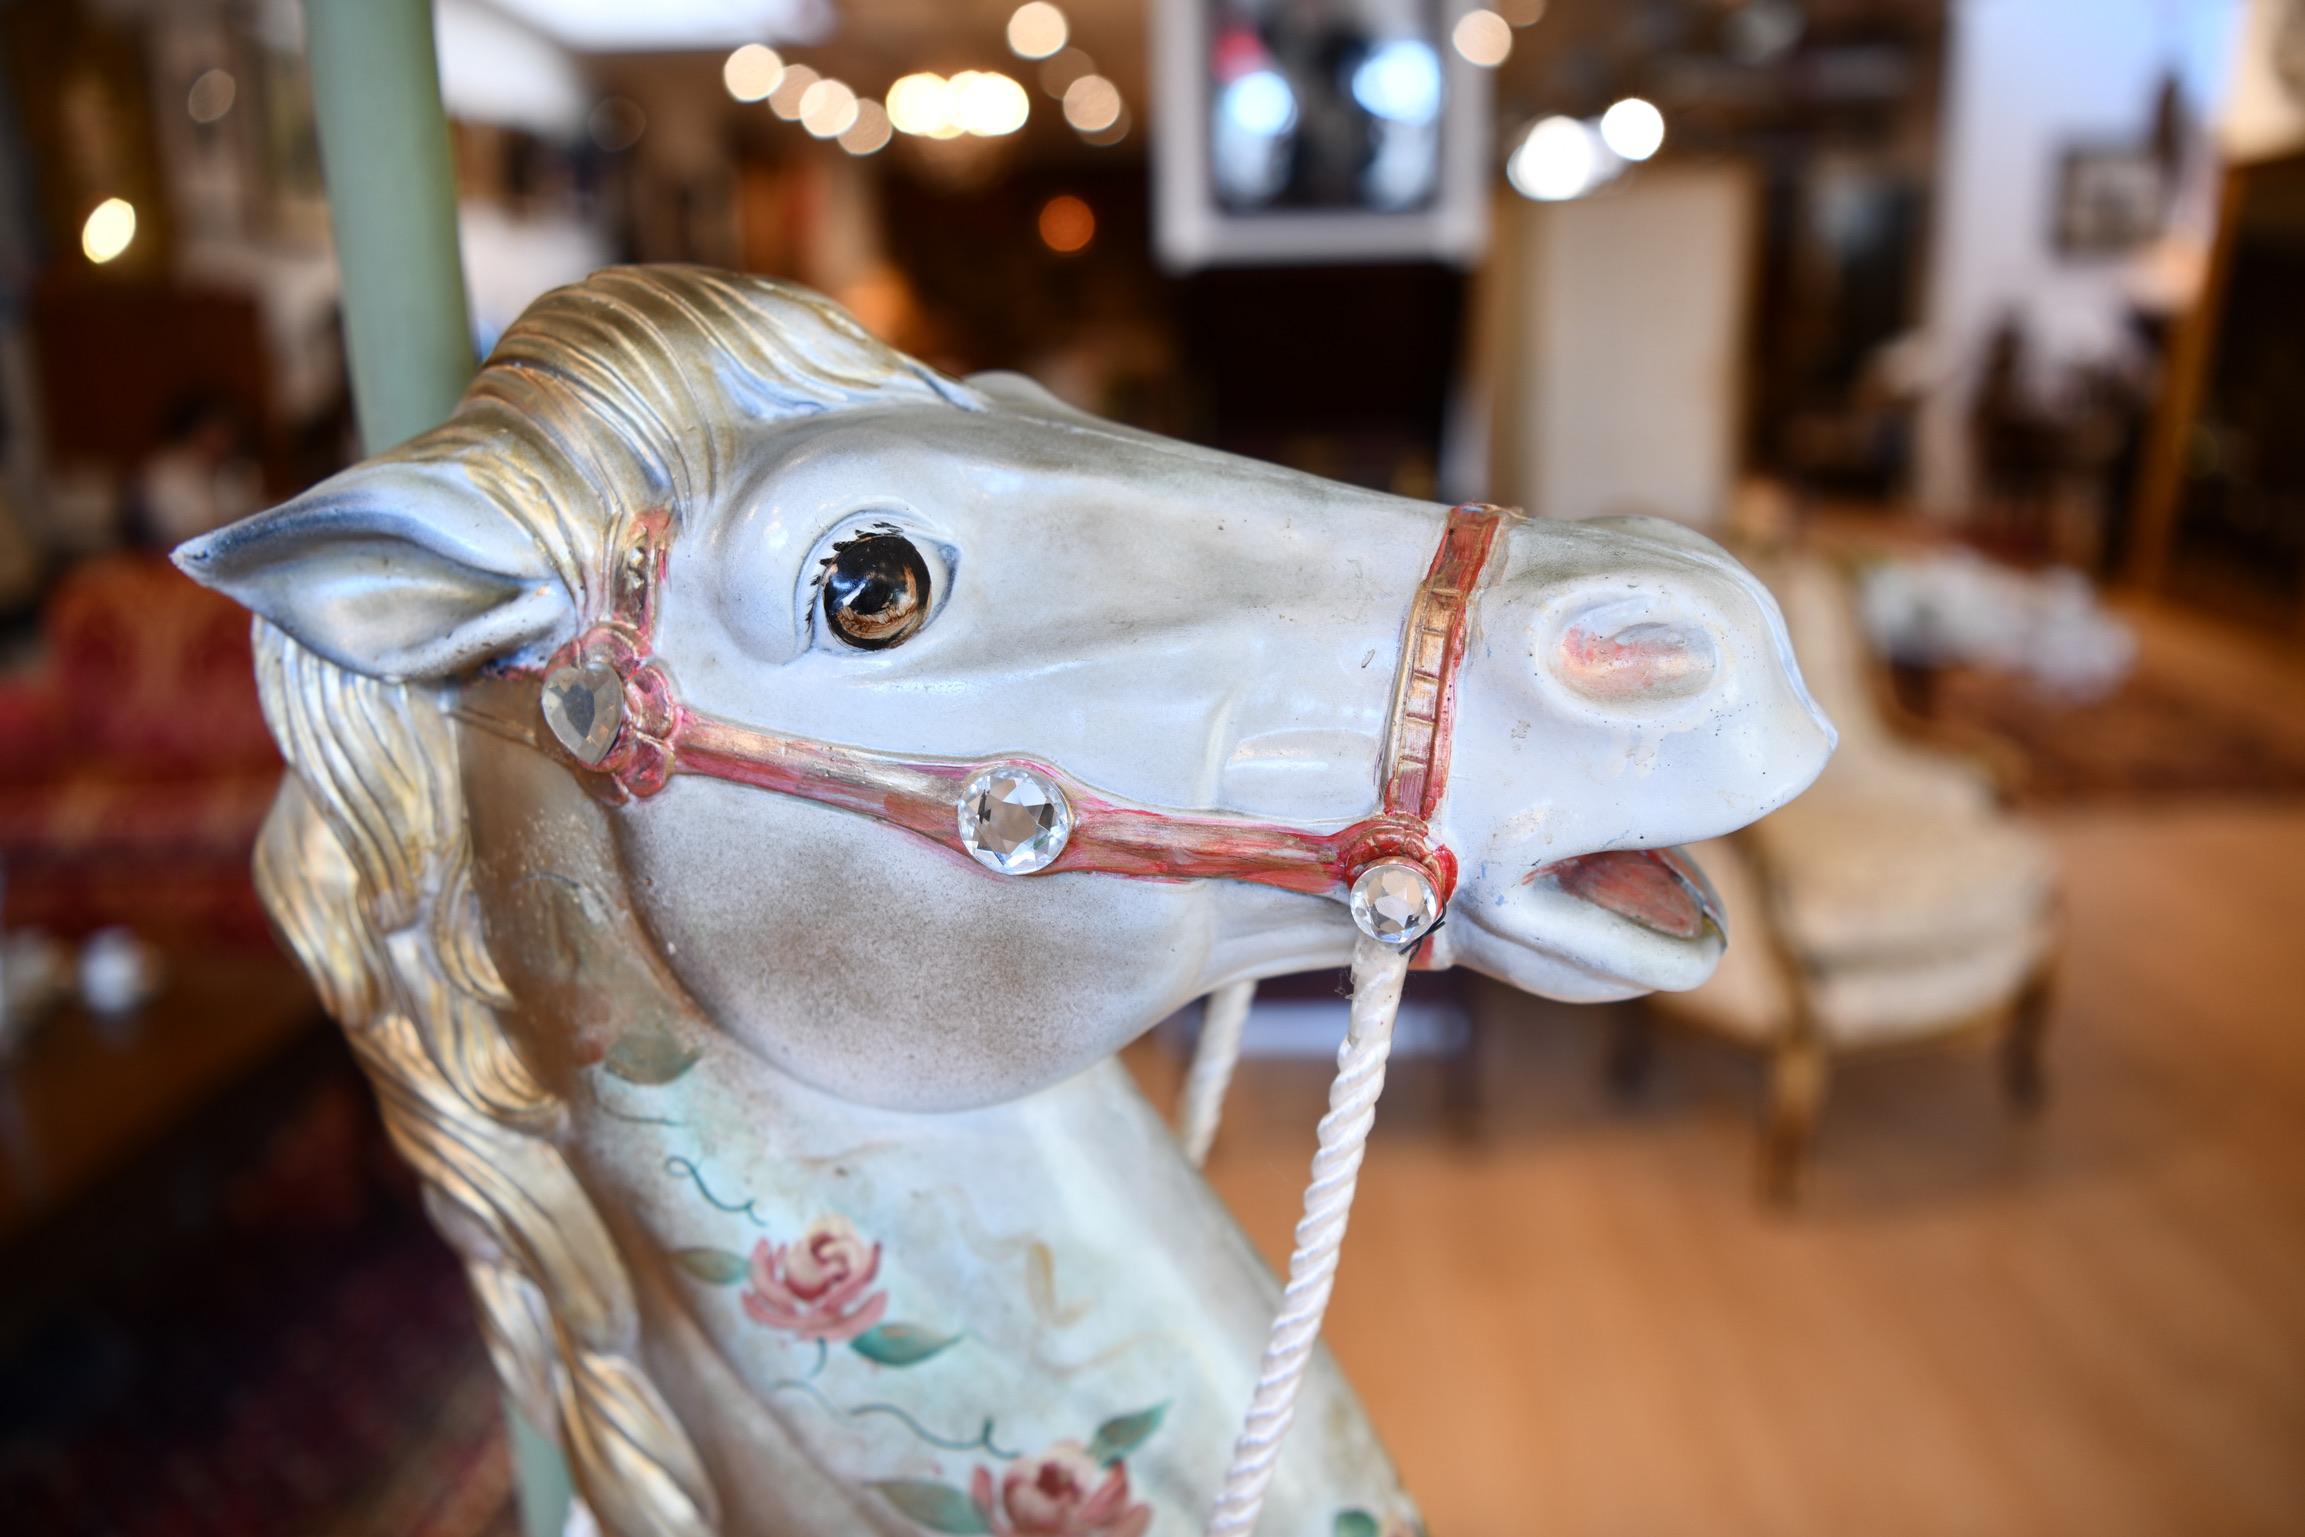 American Decorative Carousel Horse For Sale